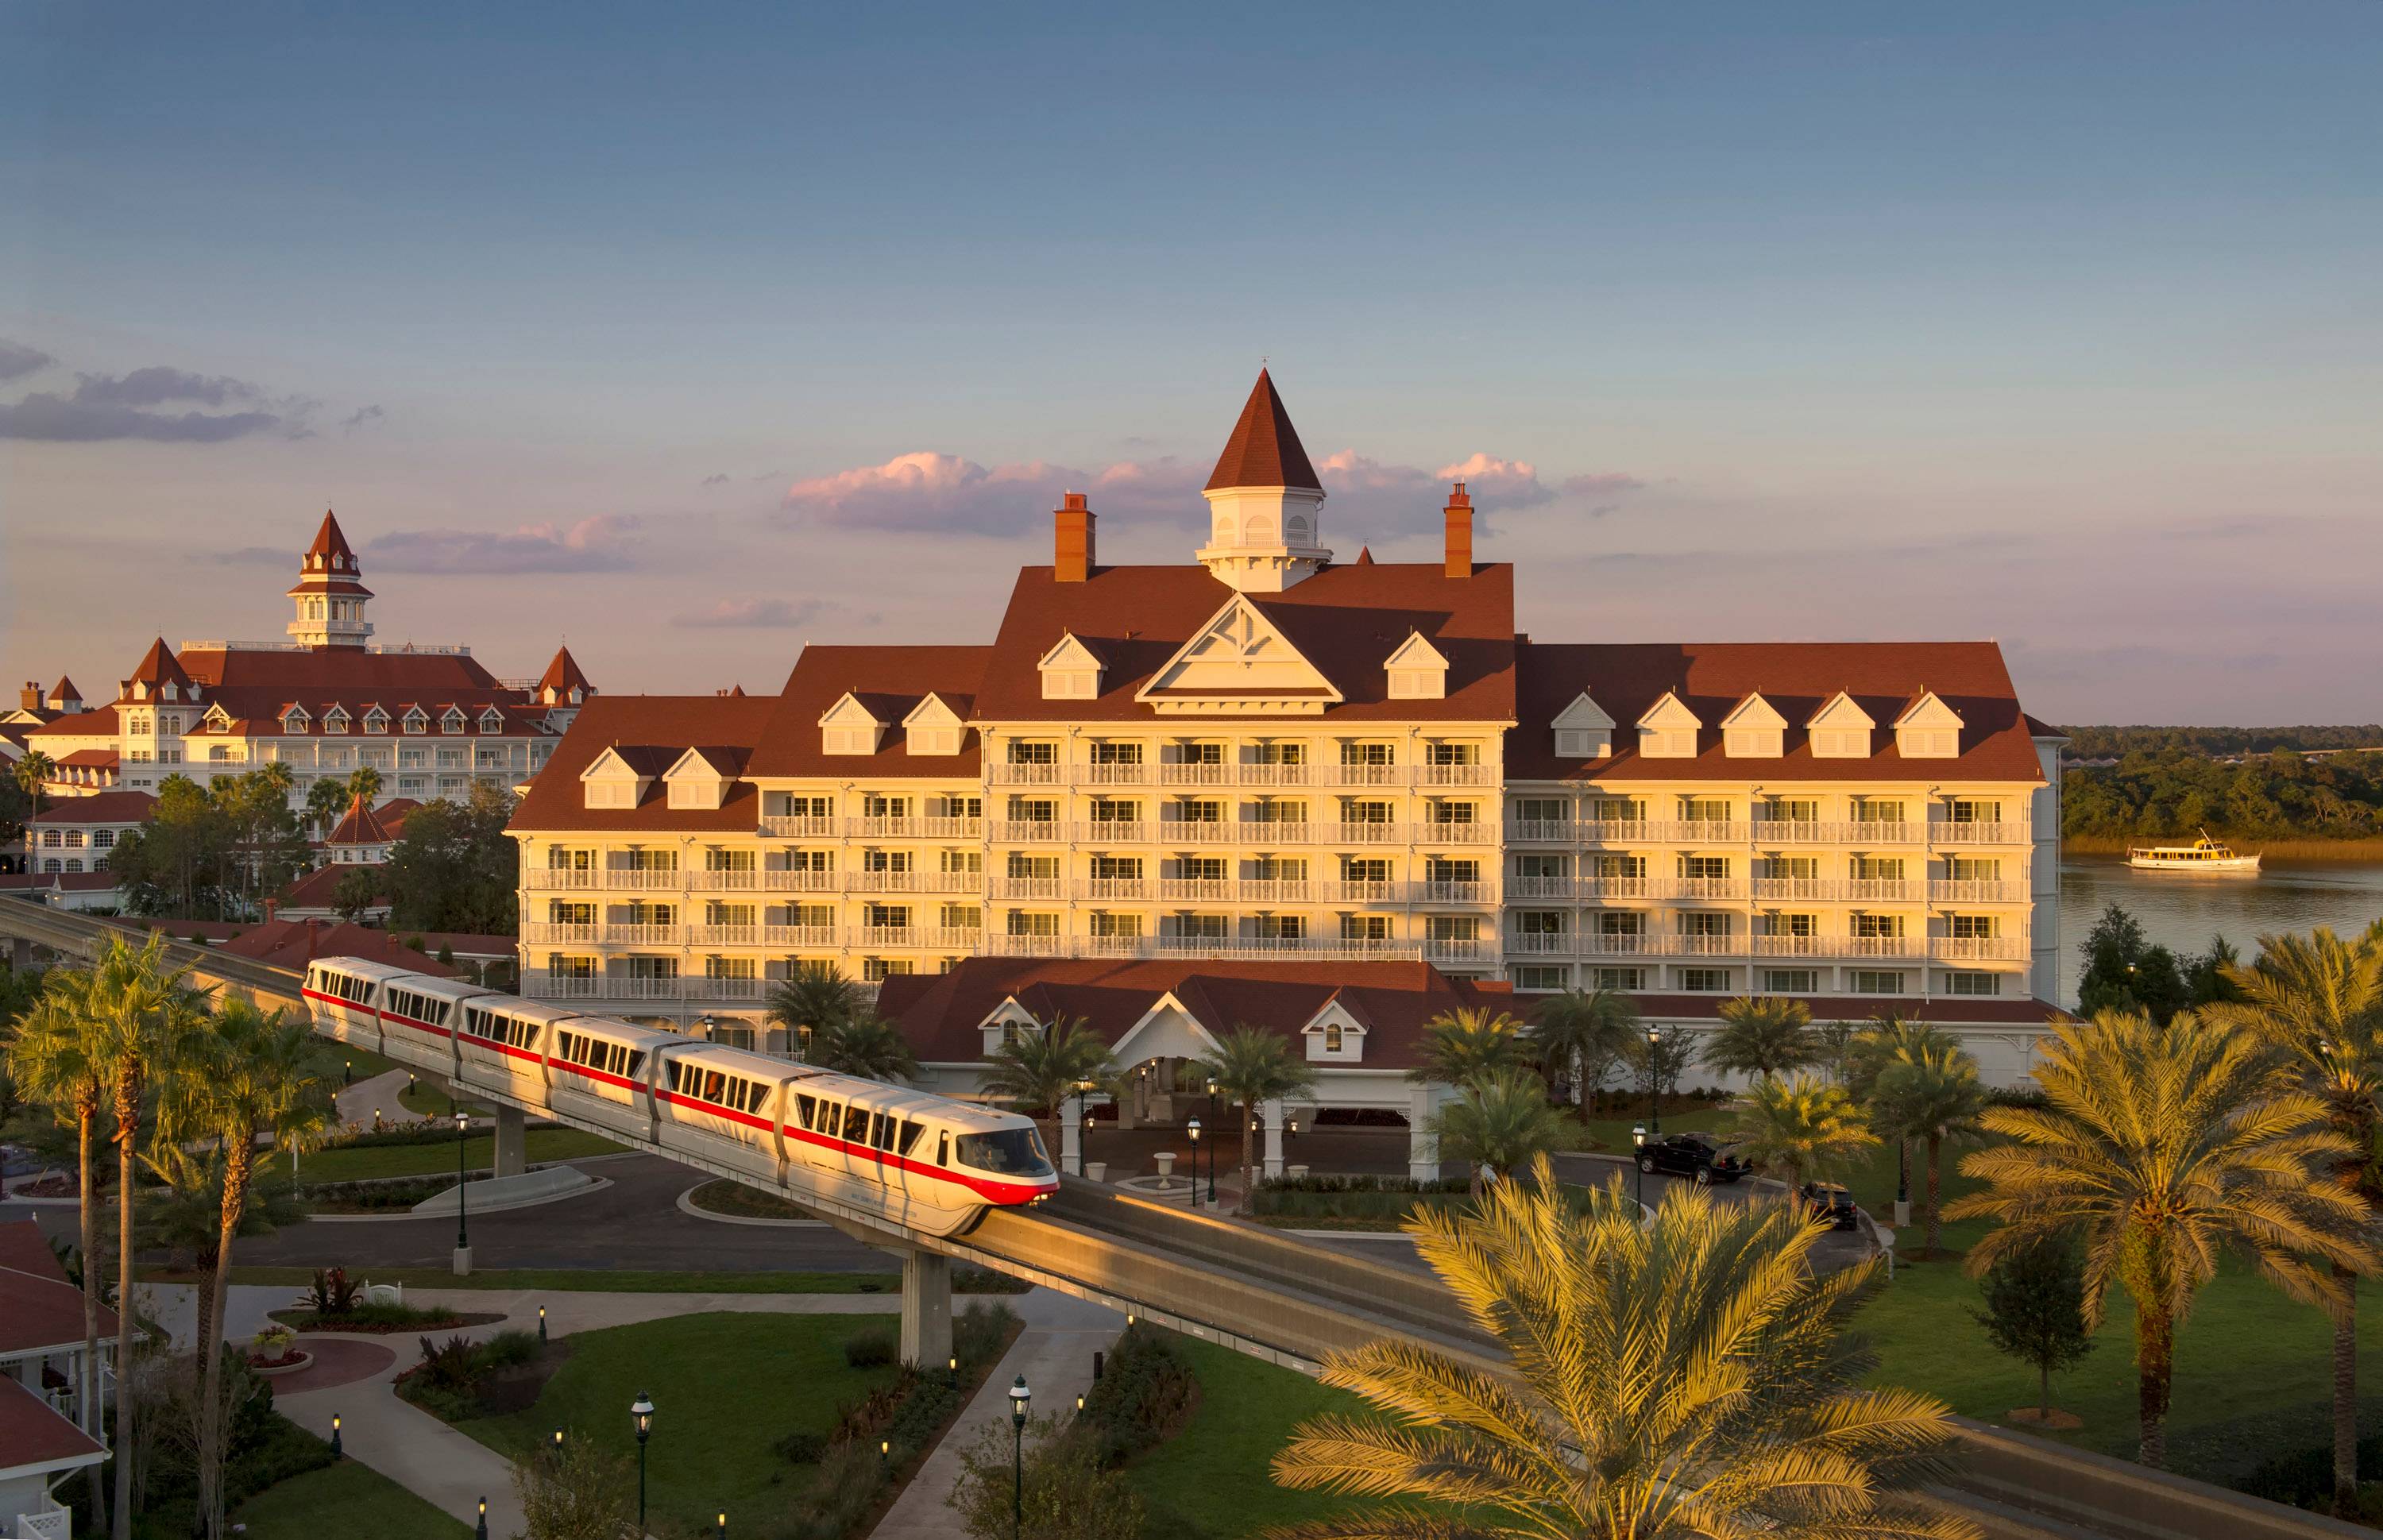 PHOTOS - The Villas at Disney's Grand Floridian Resort are now officially open